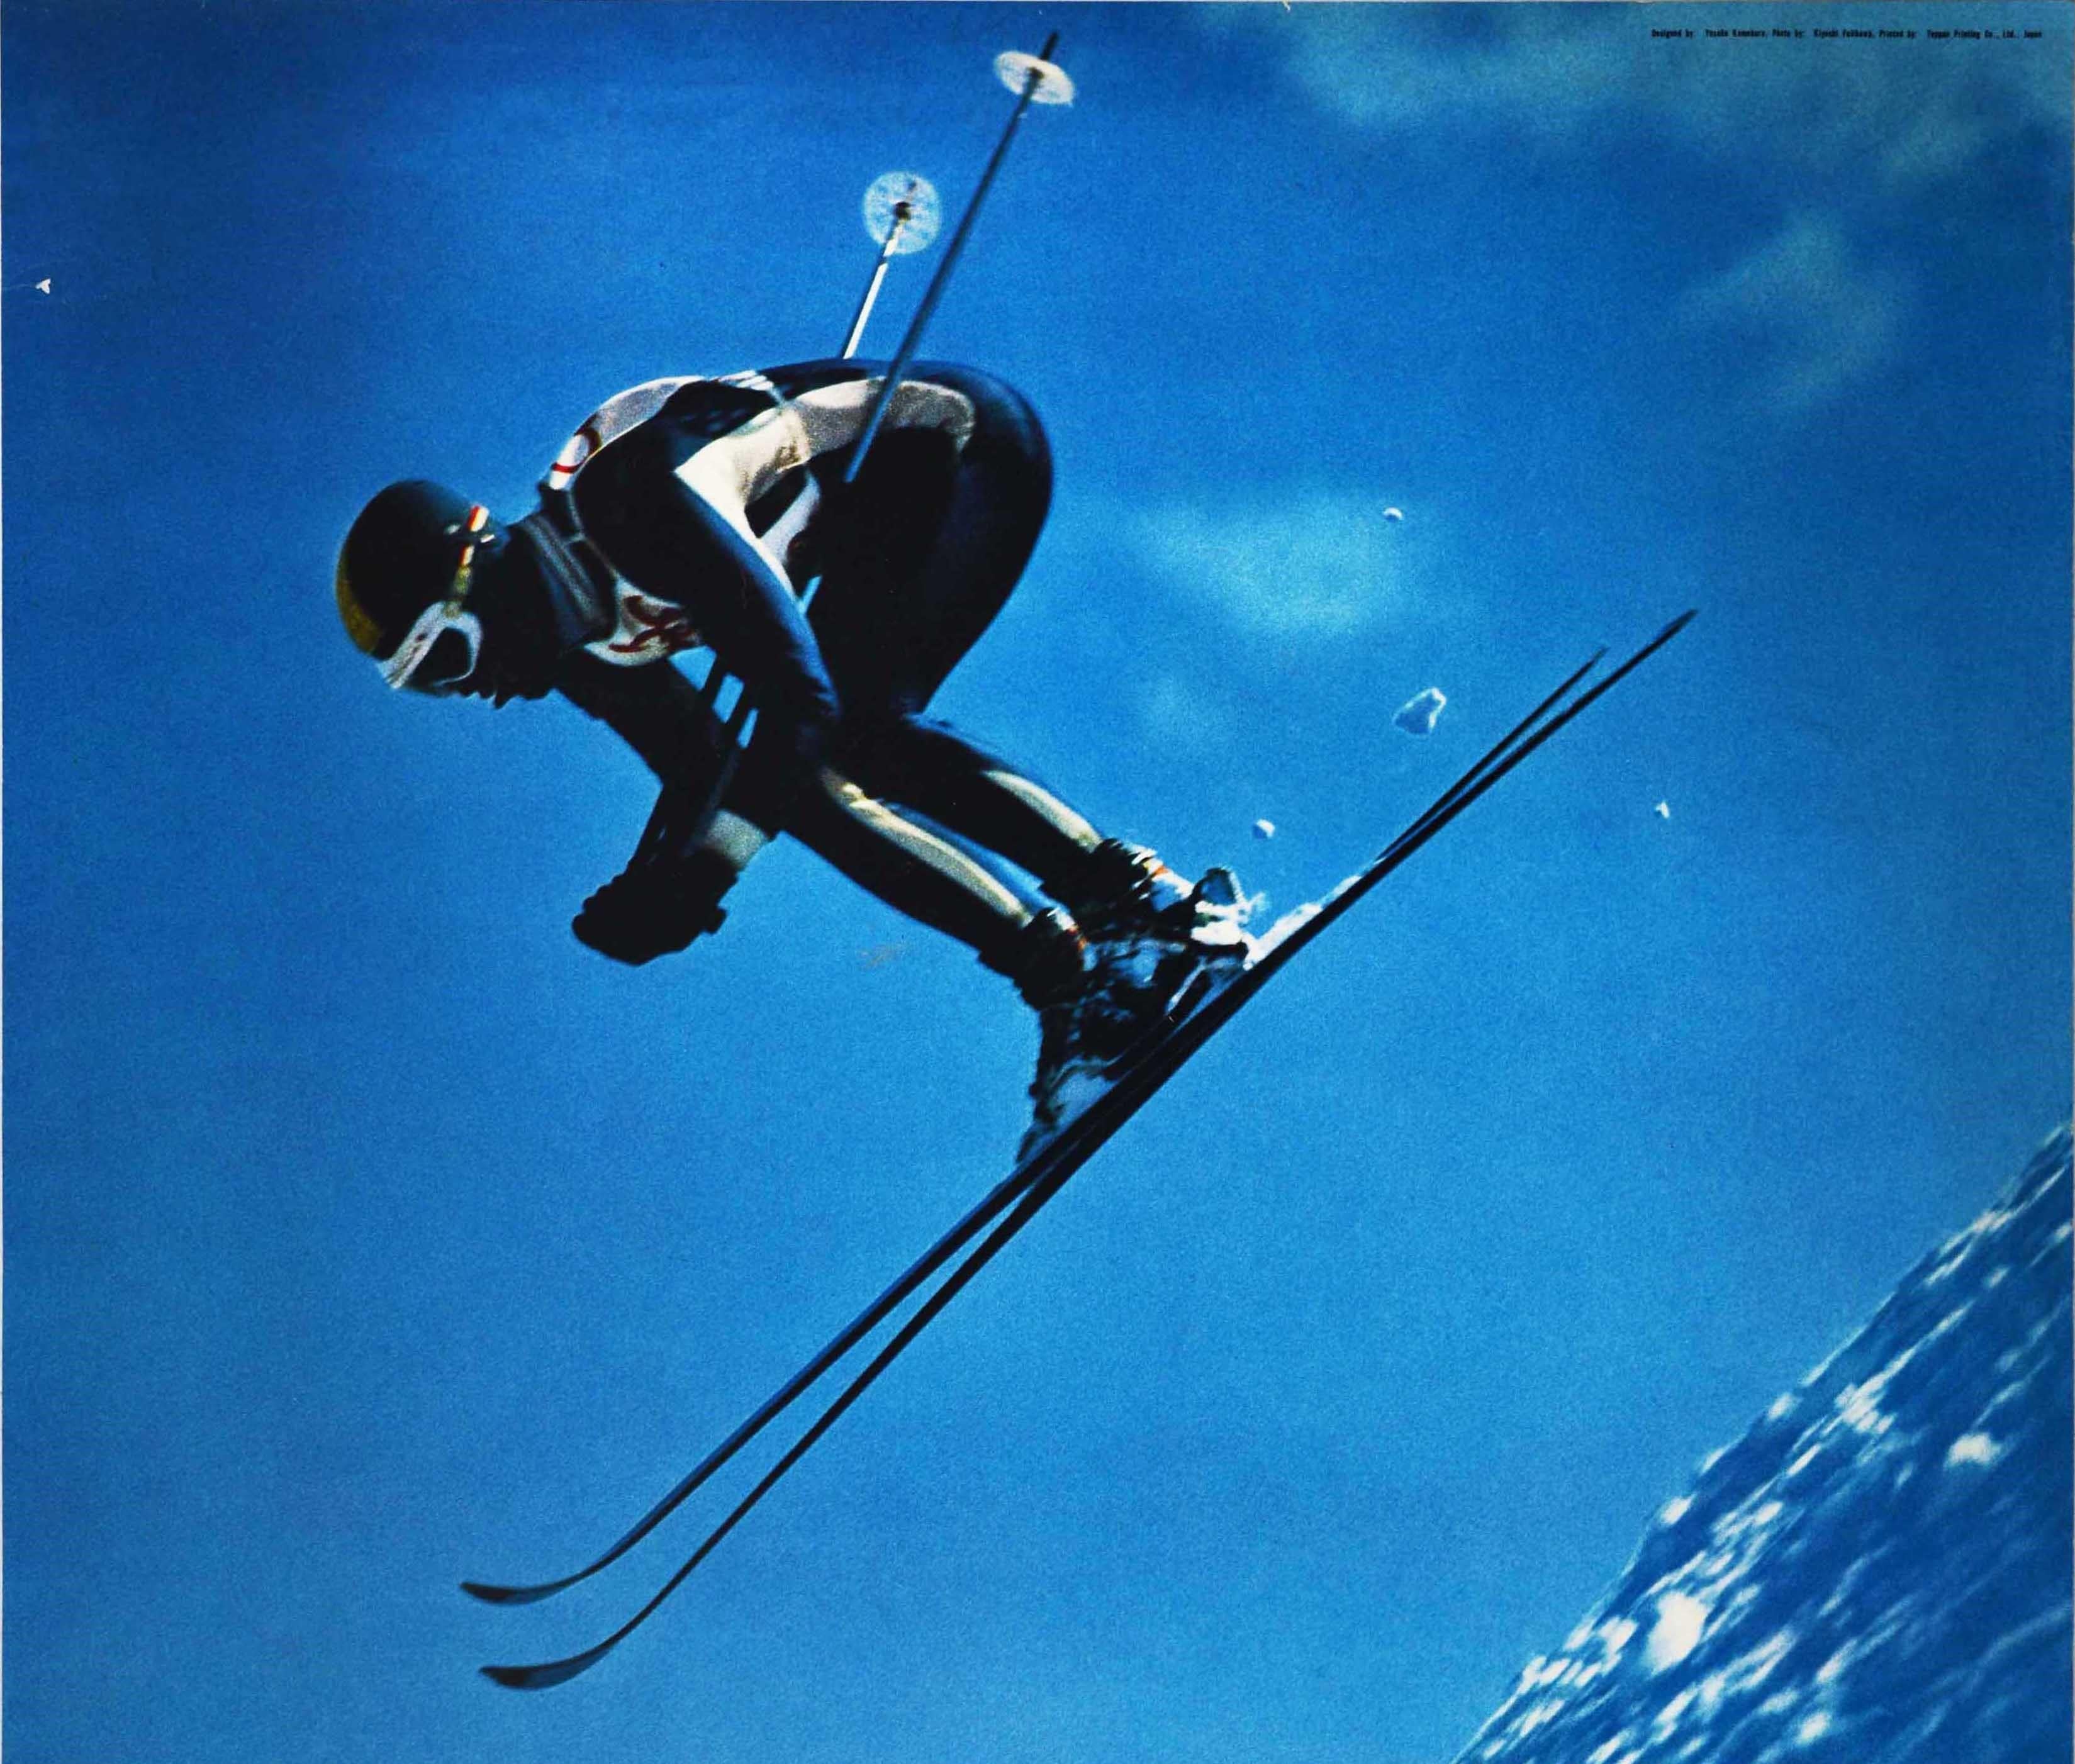 Original vintage sport poster for the XI Olympic Winter Games held in Sapporo Japan from 3-13 February 1972 featuring a skier jumping over a snowy slope at speed in front of a bright blue sky in the background, the bold black lettering and Olympic